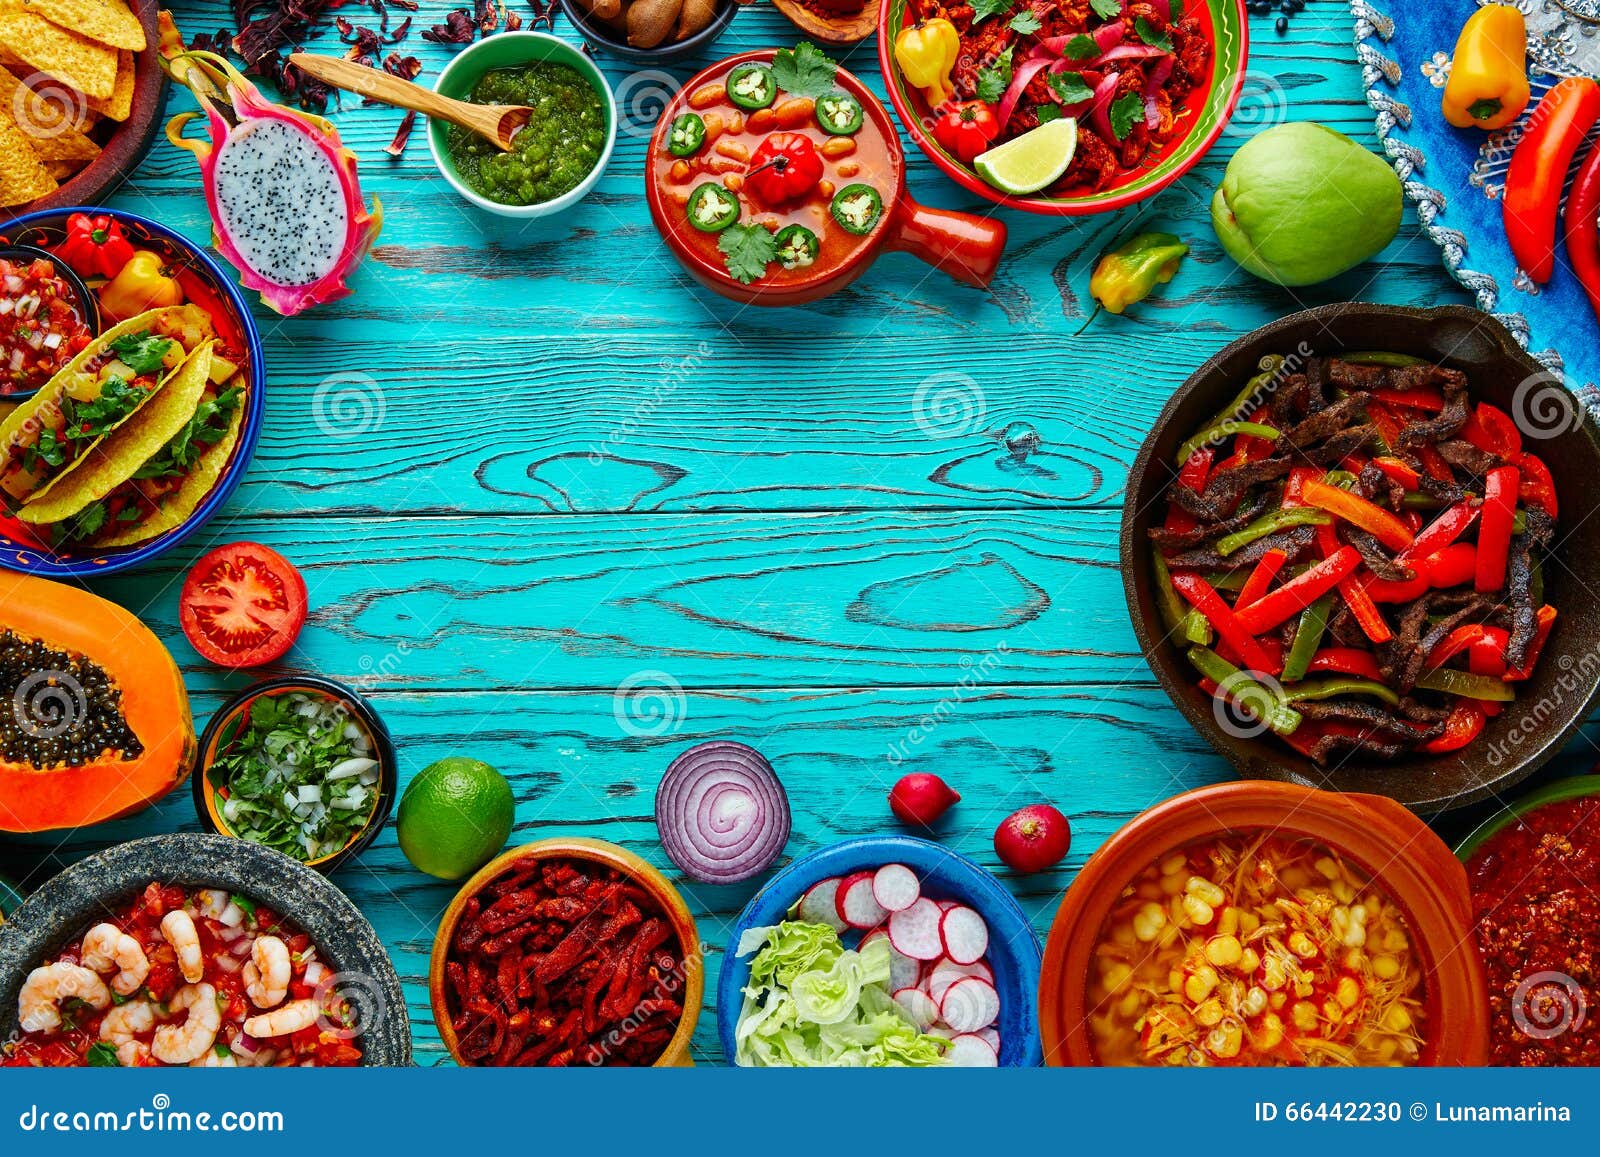 mexican food mix colorful background mexico